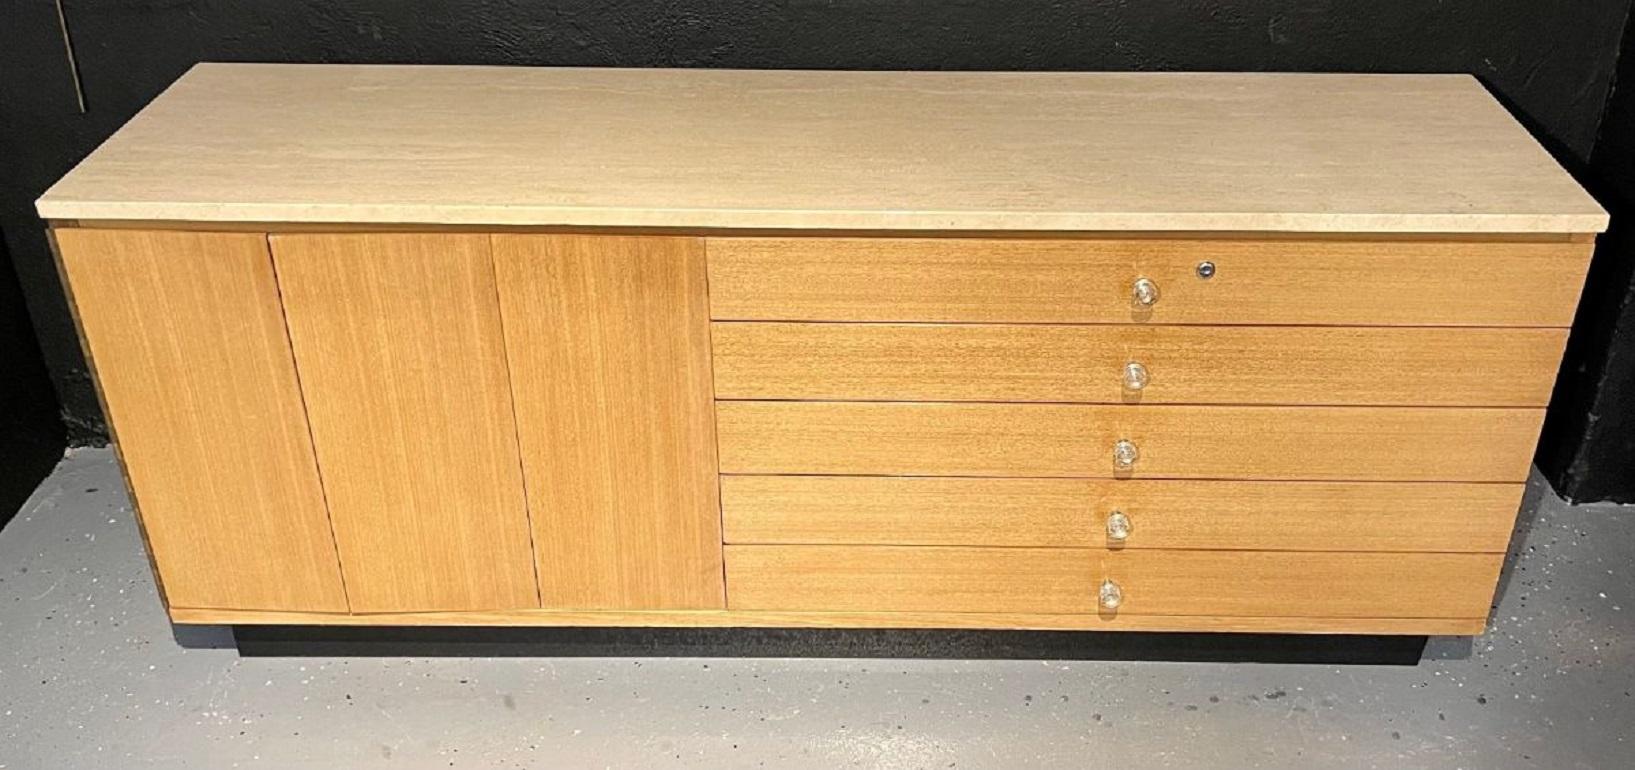 Mid-Century Modern Sideboard by Paul McCobb Credenza, Irwin Collection For Sale 4